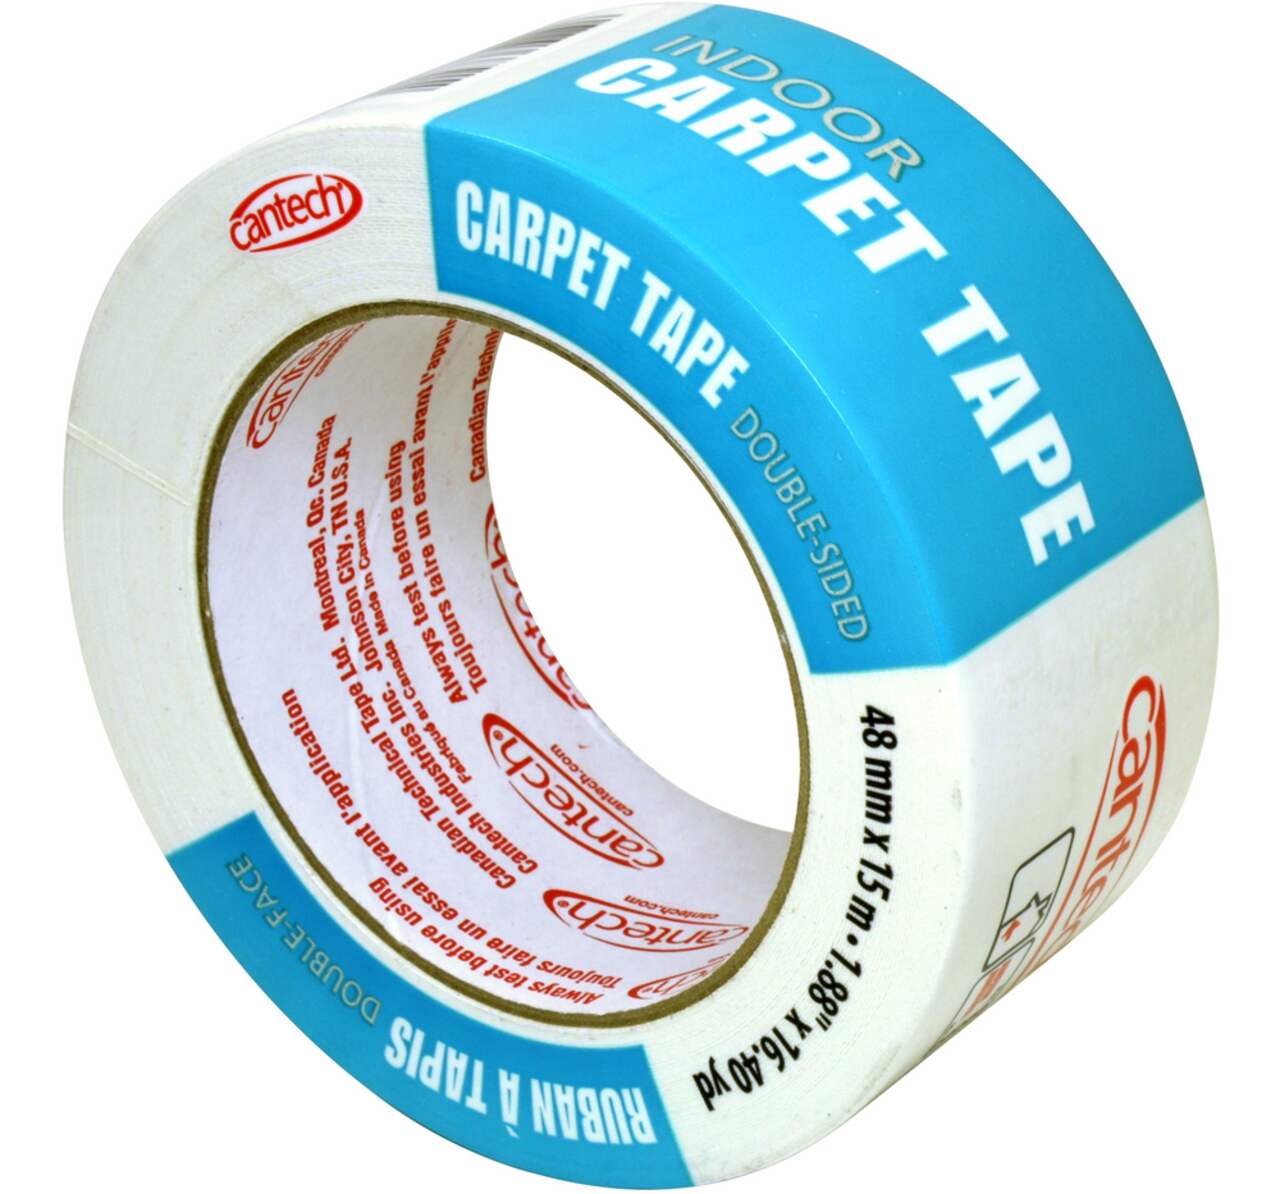 Cantech Double-Sided Indoor/Interior Carpet Tape For Repair & Installation,  48-mm x 15-m